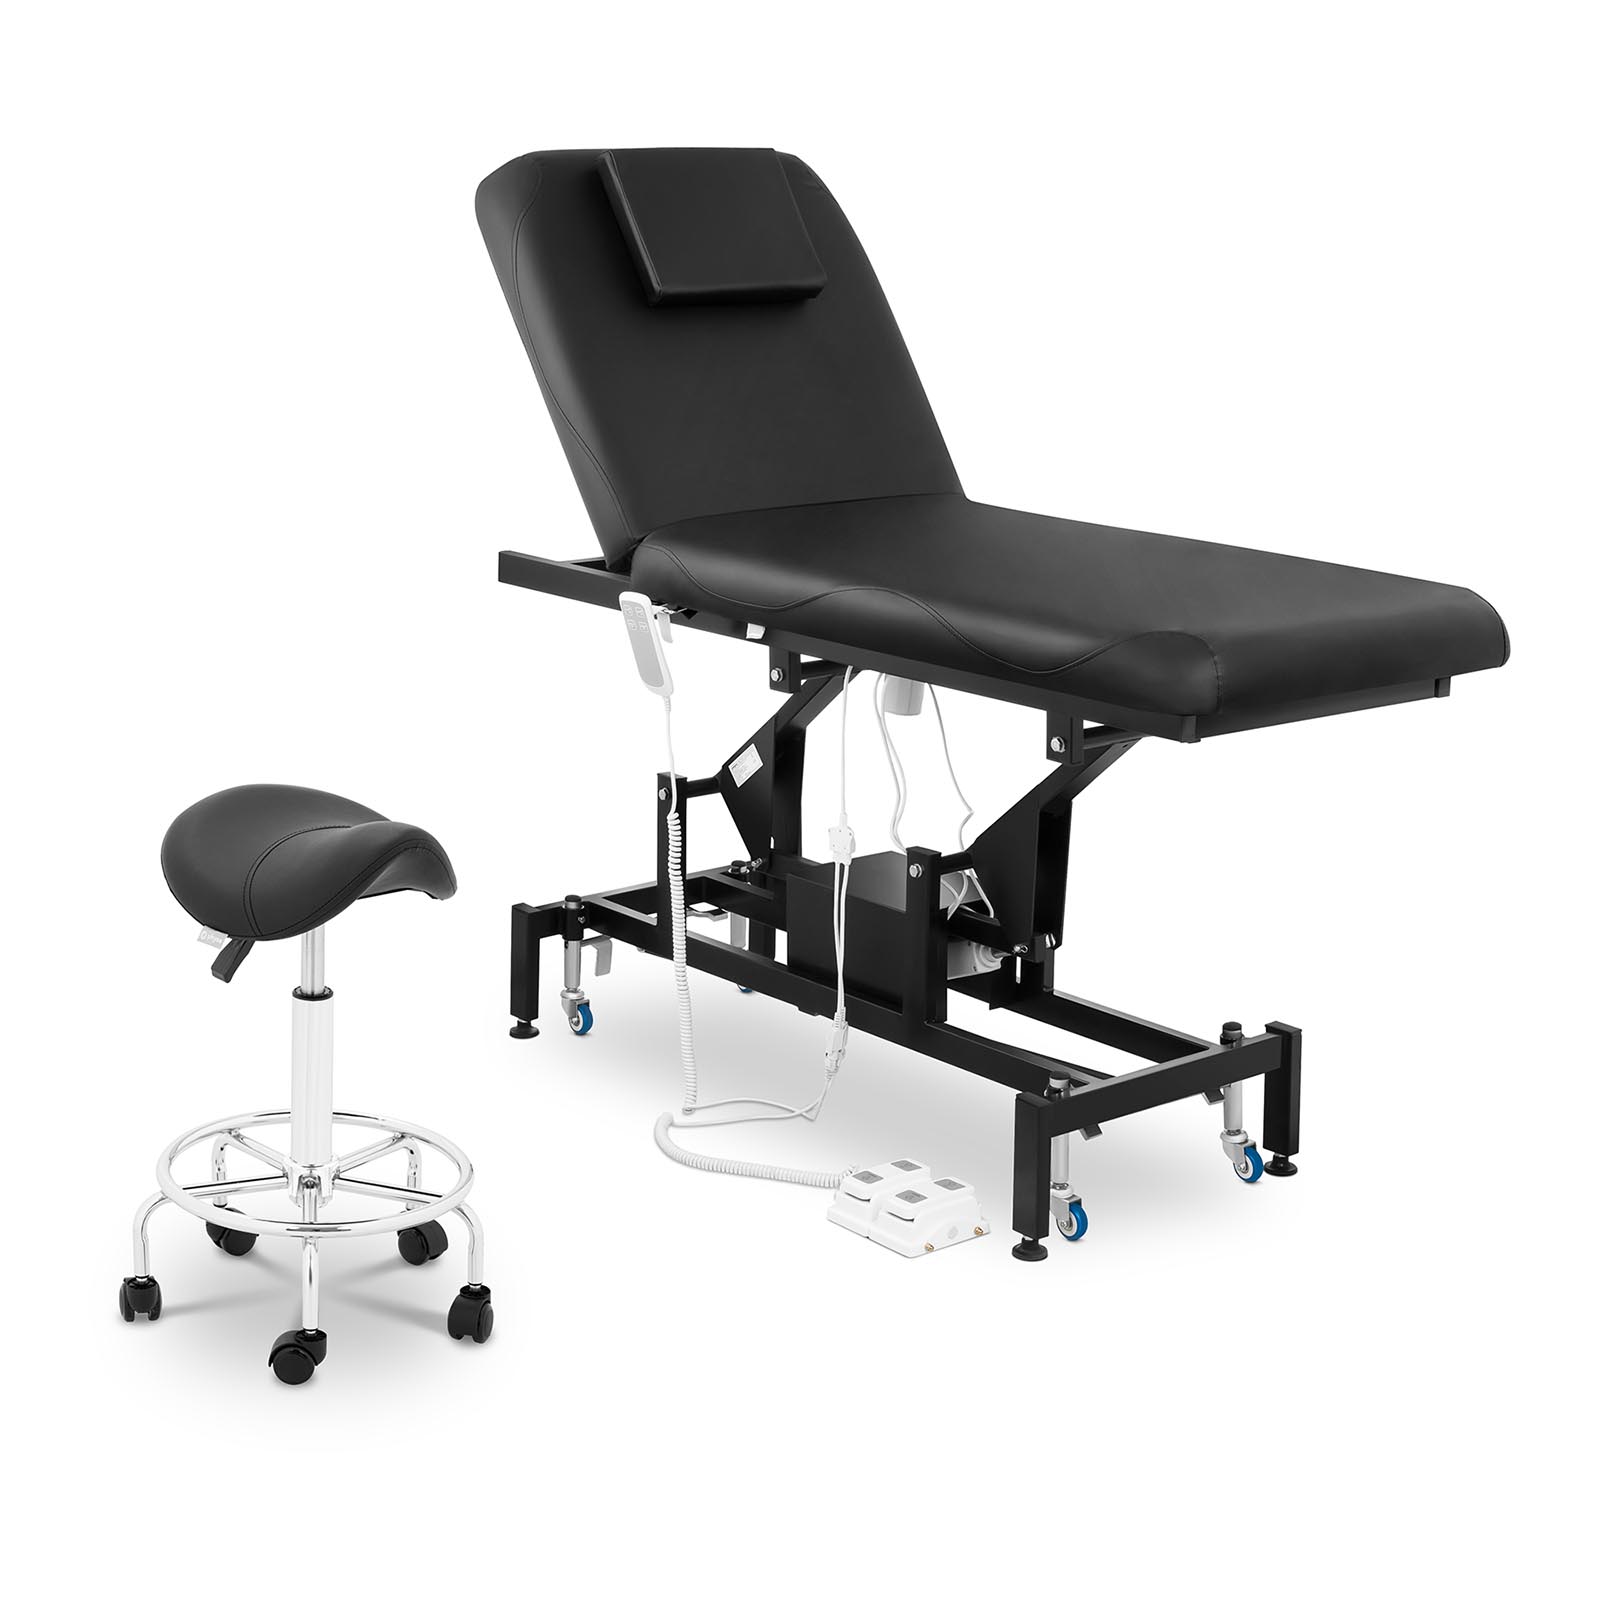 Electric Massage Table and Saddle Stool - 2 motors - foot pedal - black